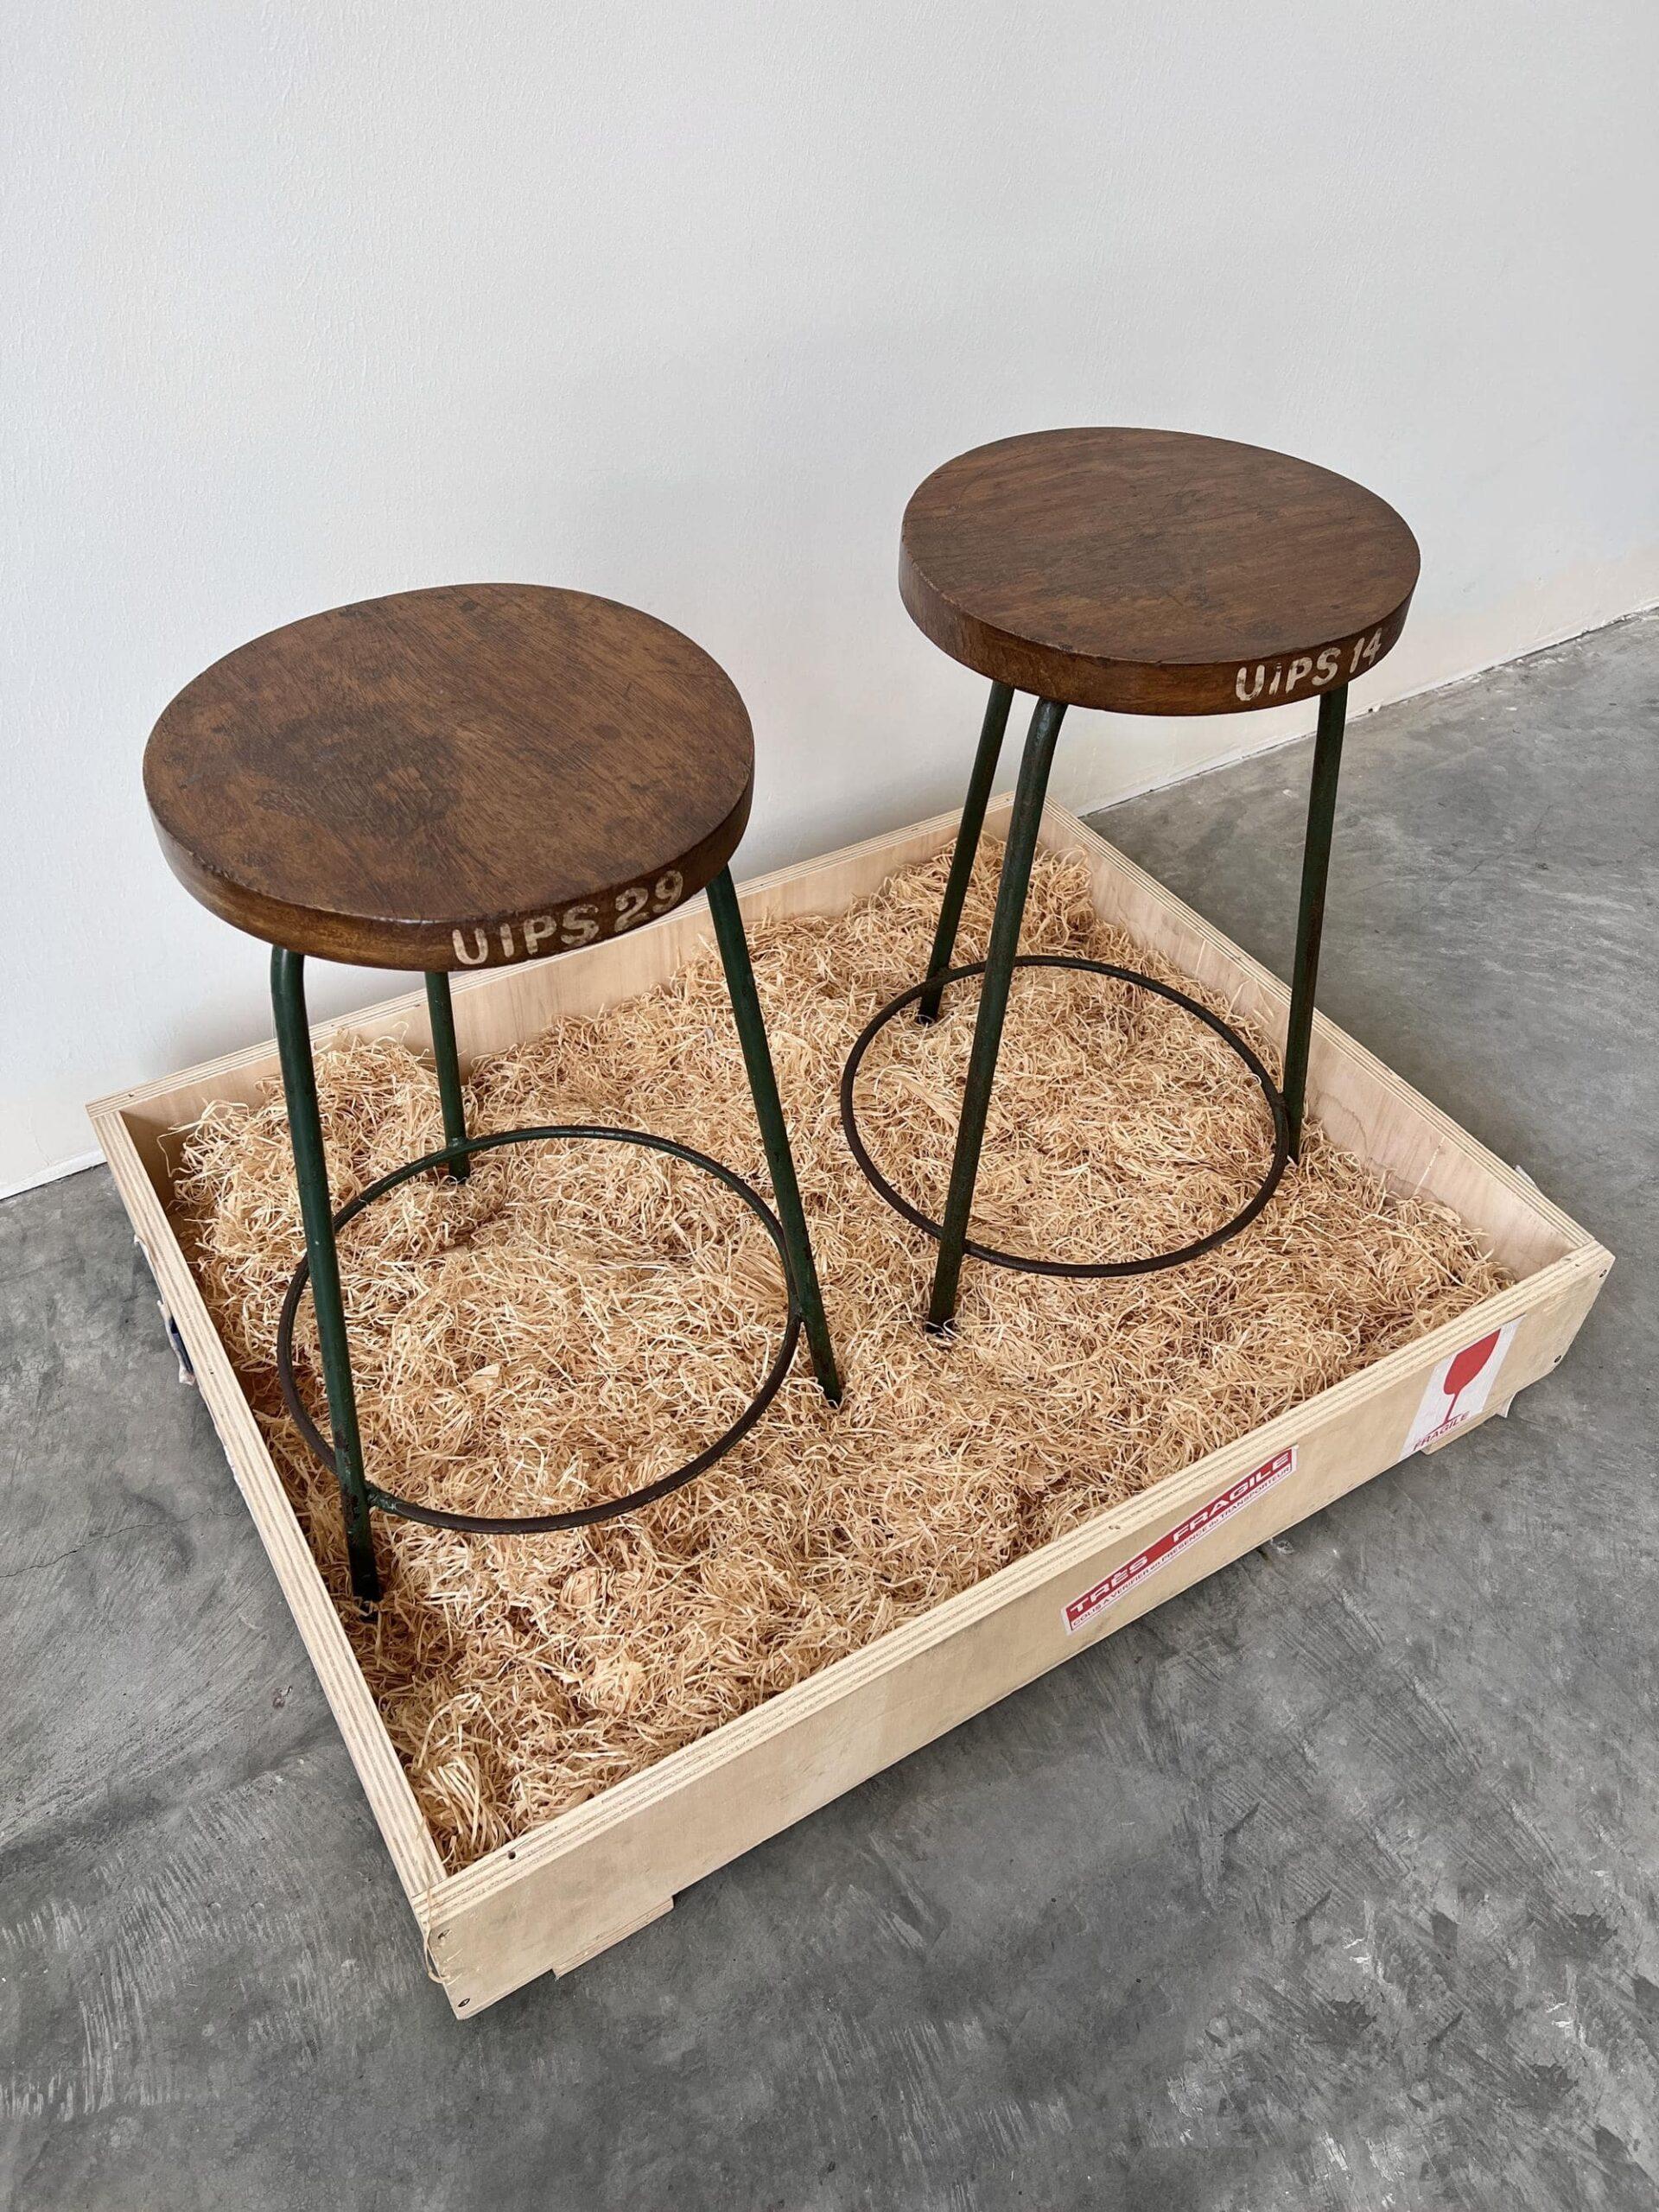 These stools are simple and playful in form but convey an understated elegance. The circular teak seating sits on top of a patinated green color iron tripod base. 

Markings indicate final usage at Institute Of Pharmaceutical Sciences at Panjab